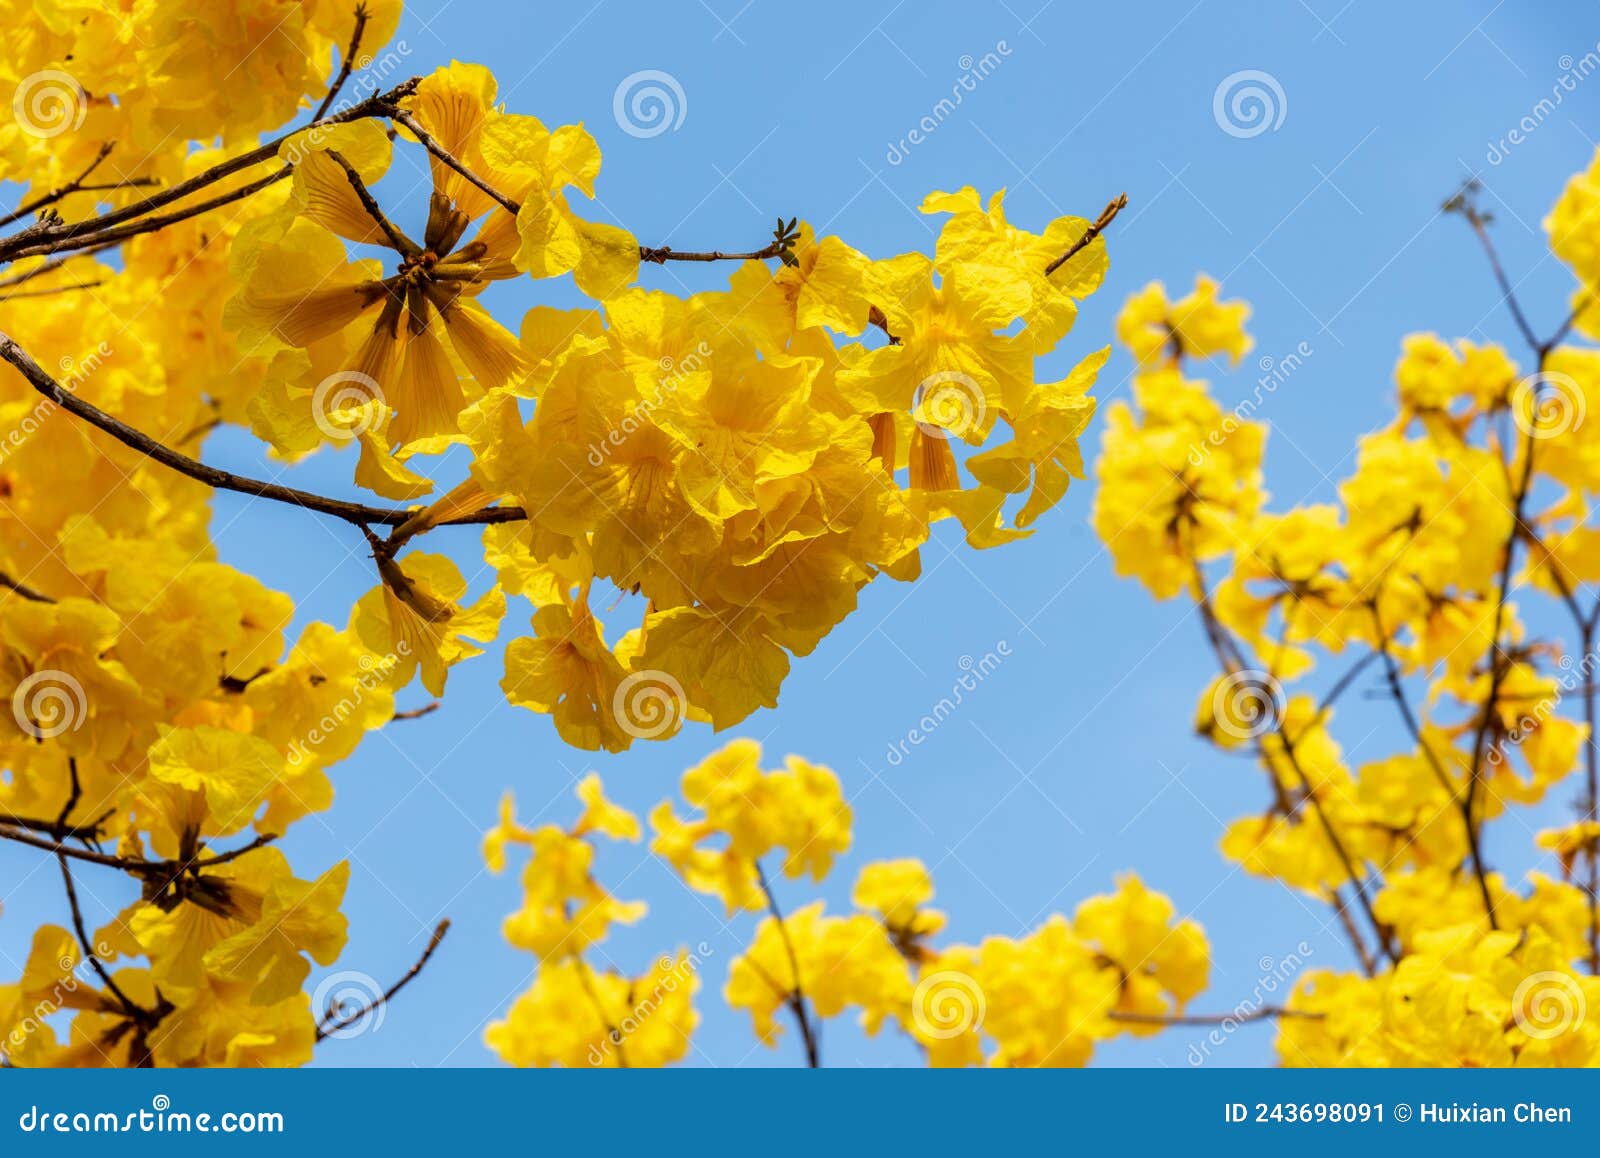 Golden Tabebuia Chrysotricha or Golden Trumpet Tree Bloom Brilliantly in  Spring in South China. Stock Image - Image of evergreen, landscape:  243698091